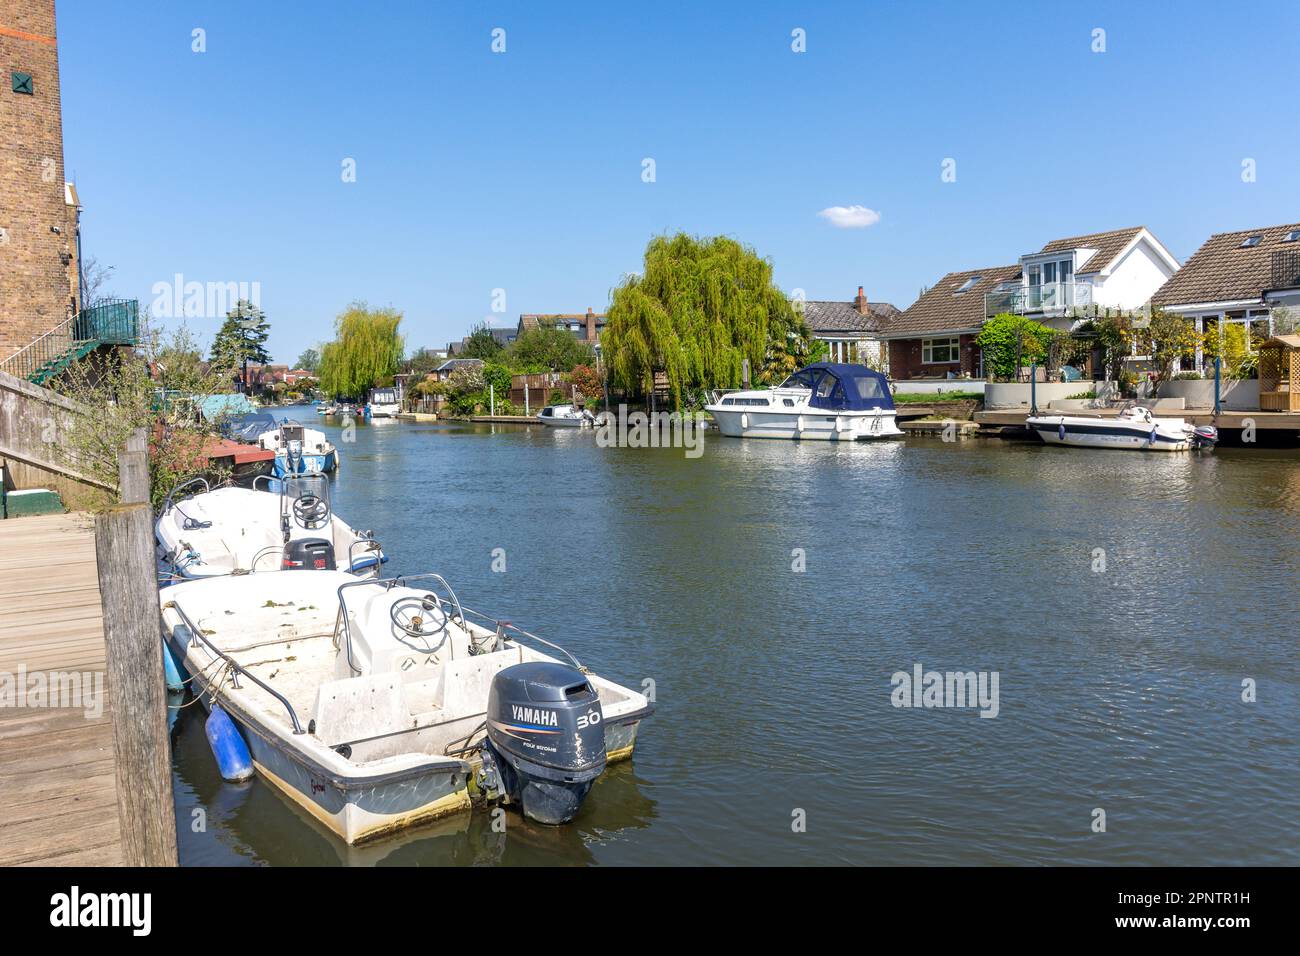 Thames Ditton Island across River Thames from Ye Olde Swan Pub, Summer Road, Thames Ditton, Surrey, England, United Kingdom Stock Photo